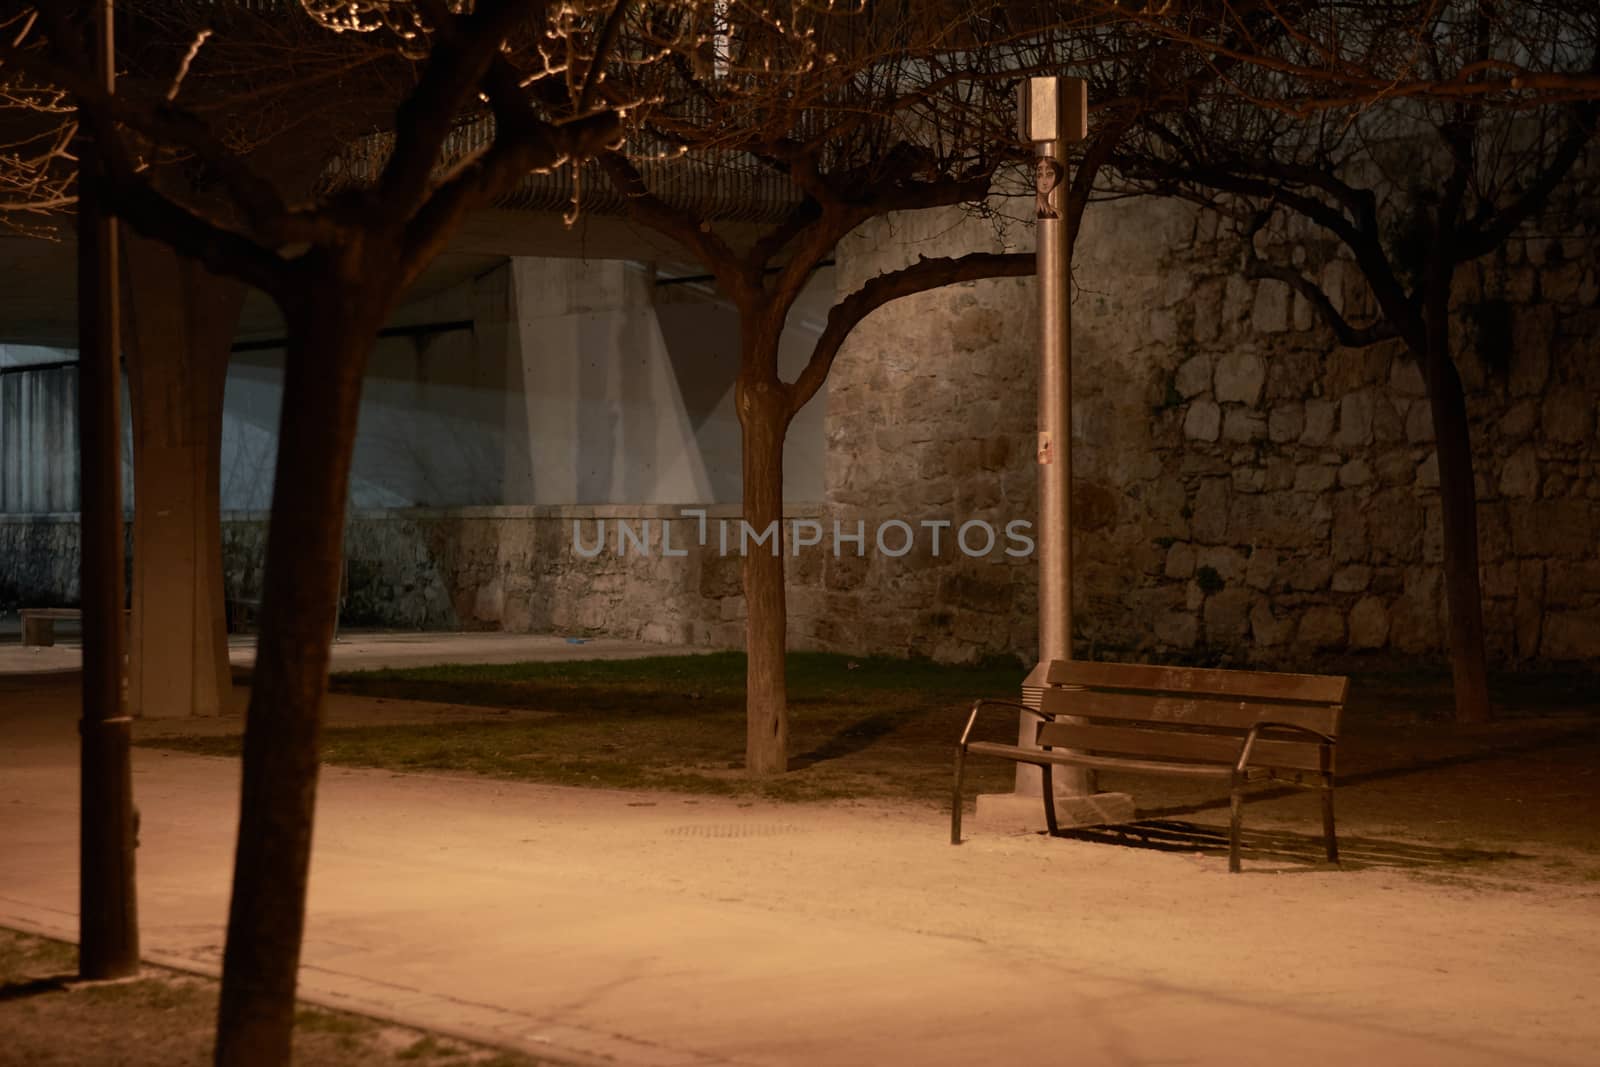 Lonely bench in the dark waiting for a friend. Loneliness and tranquility